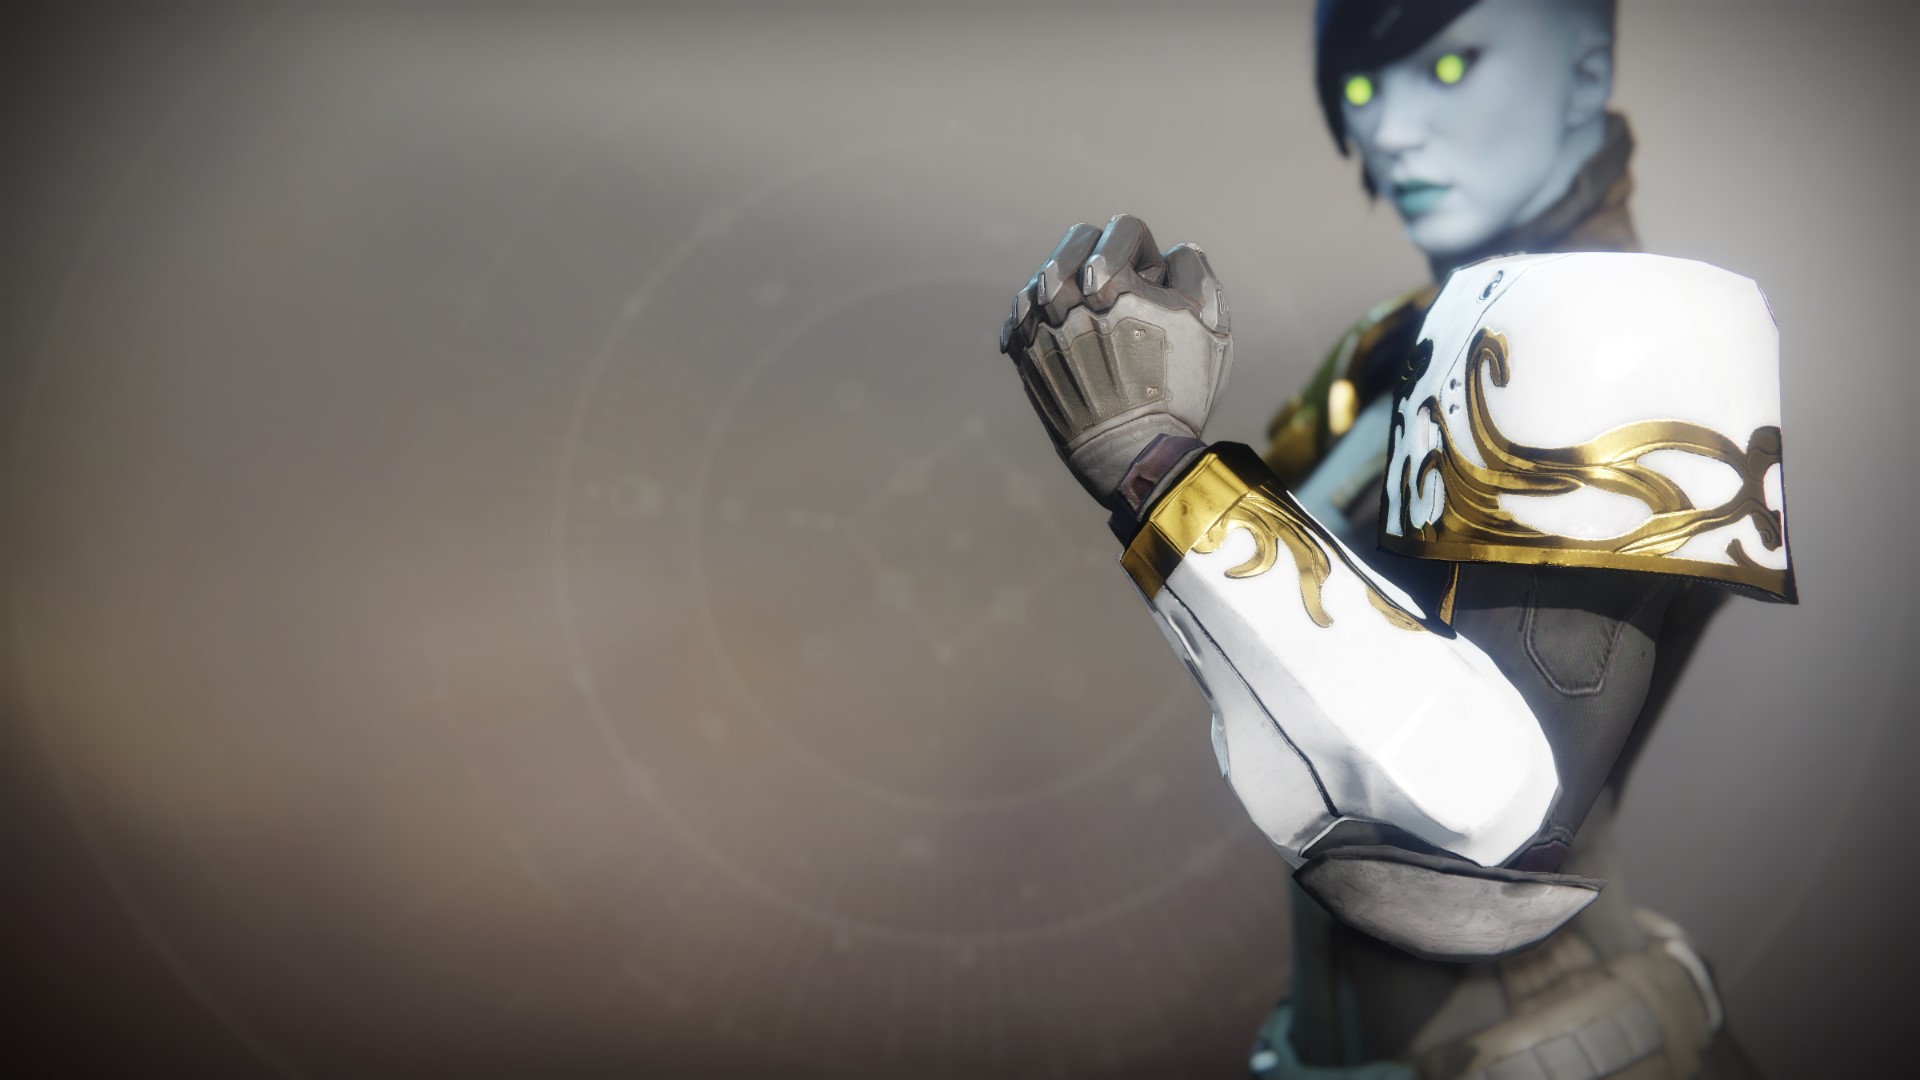 An in-game render of the Solstice Gauntlets (Majestic).